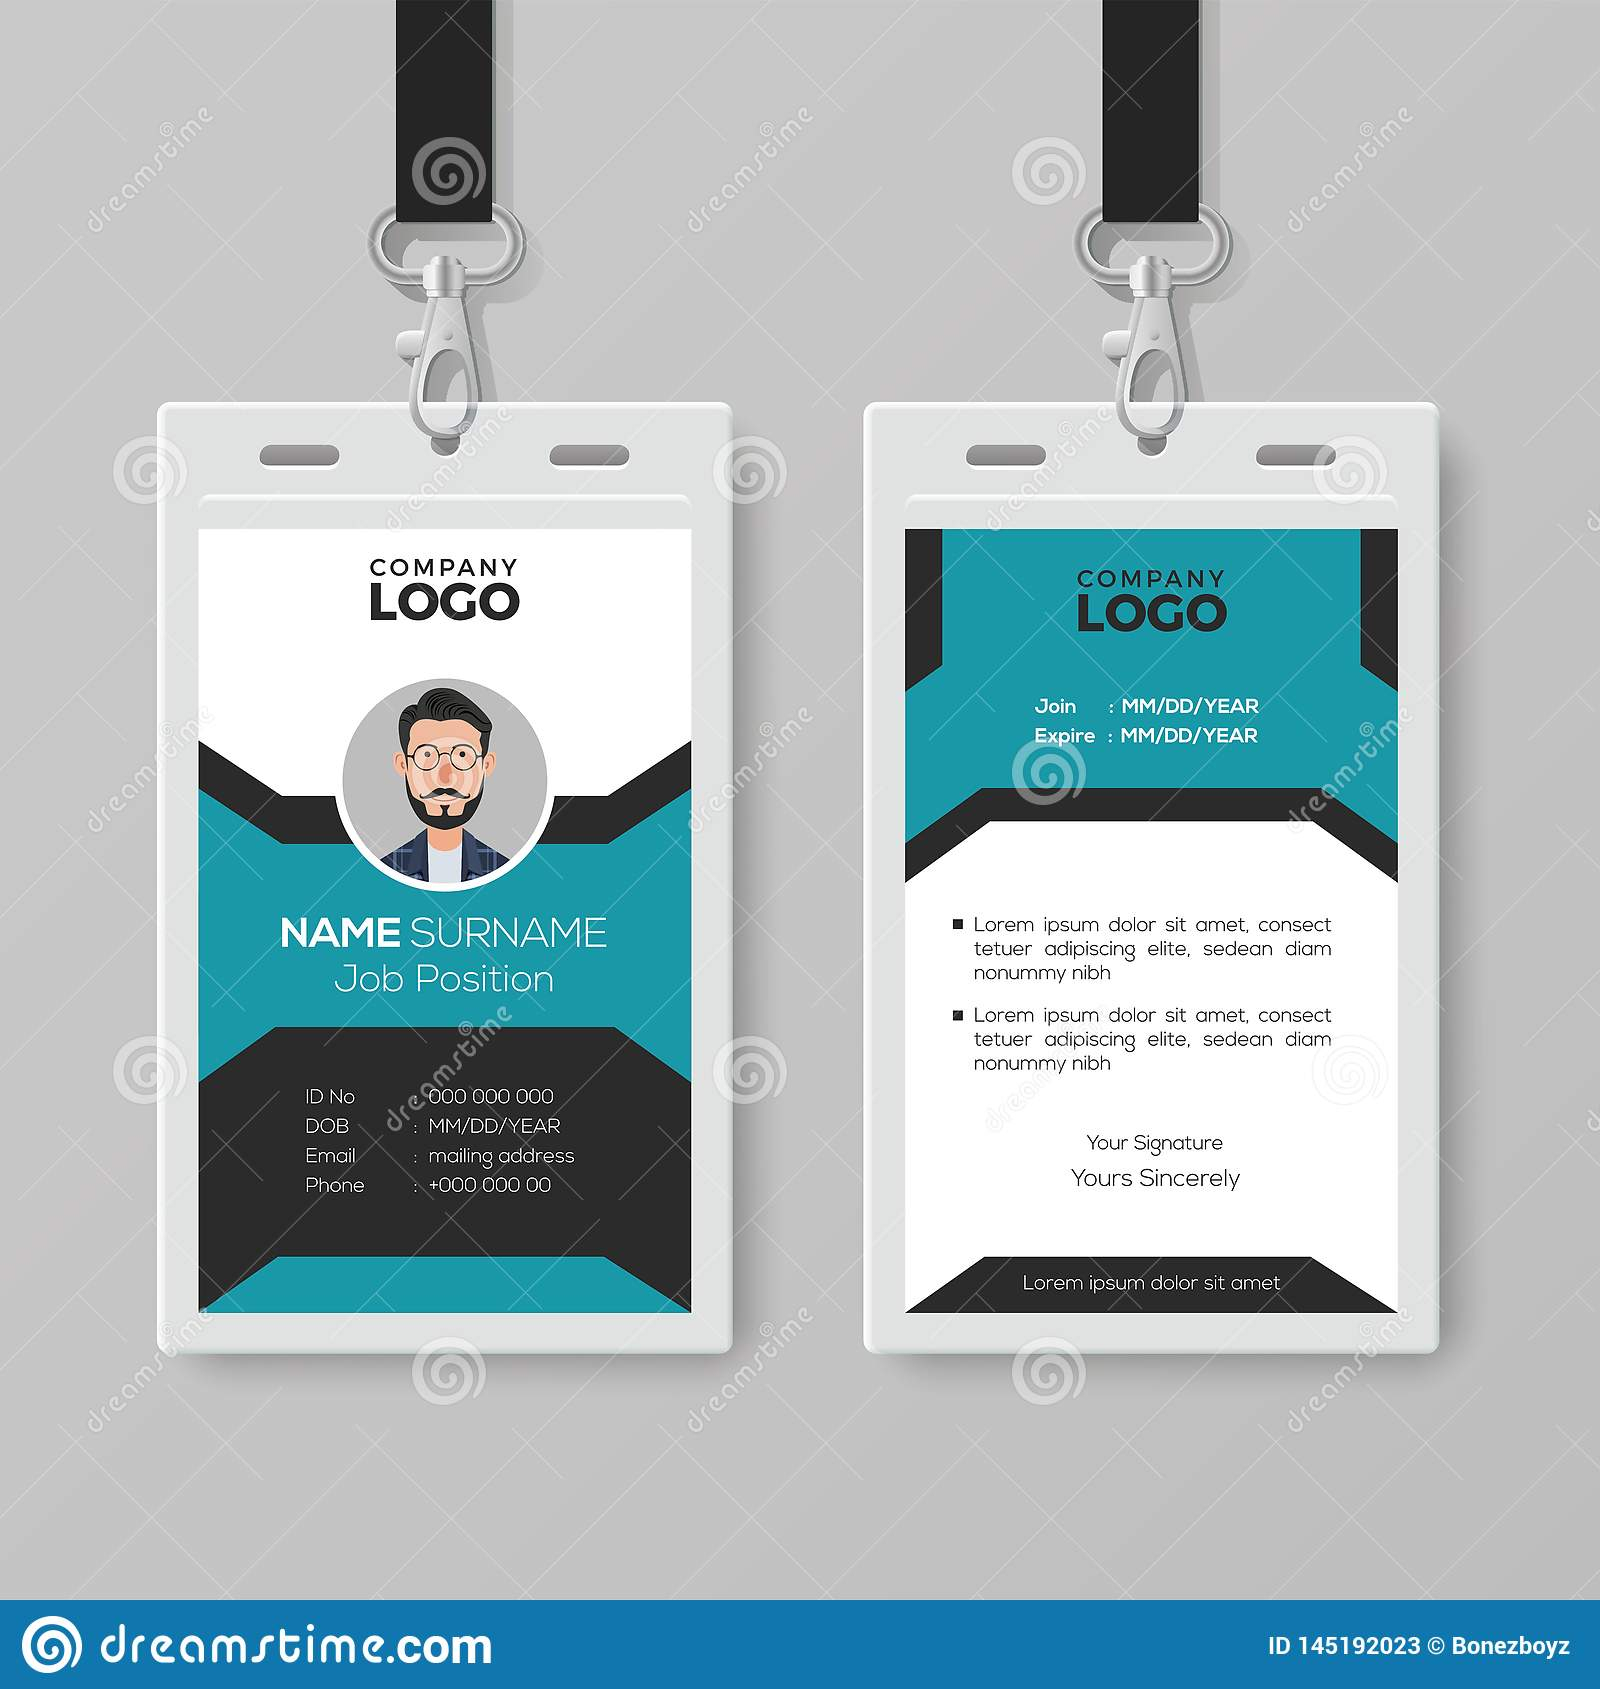 Creative Employee Id Card Template Stock Vector Inside Office Max Business Card Template